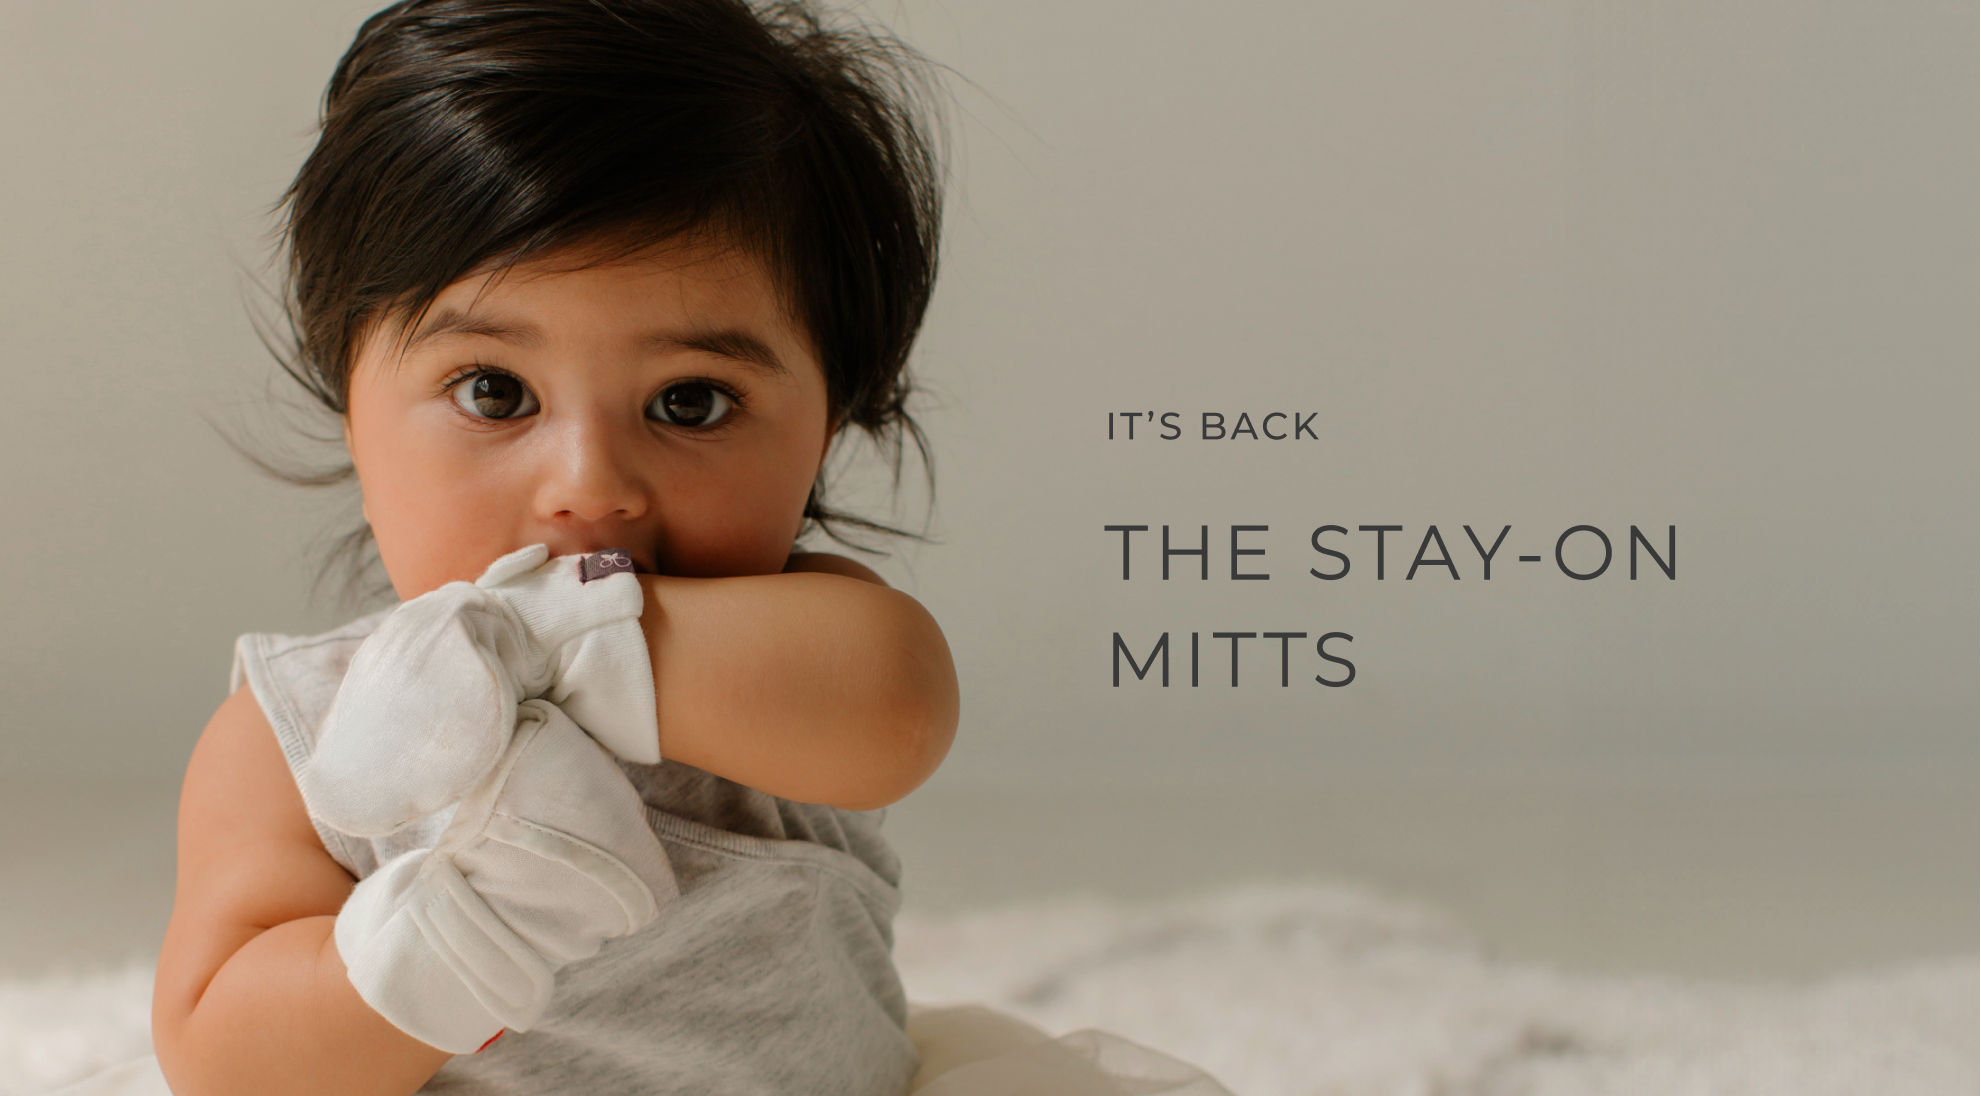 mitts_banner_632067c3-4667-44e8-a959-291ae29bb429.png